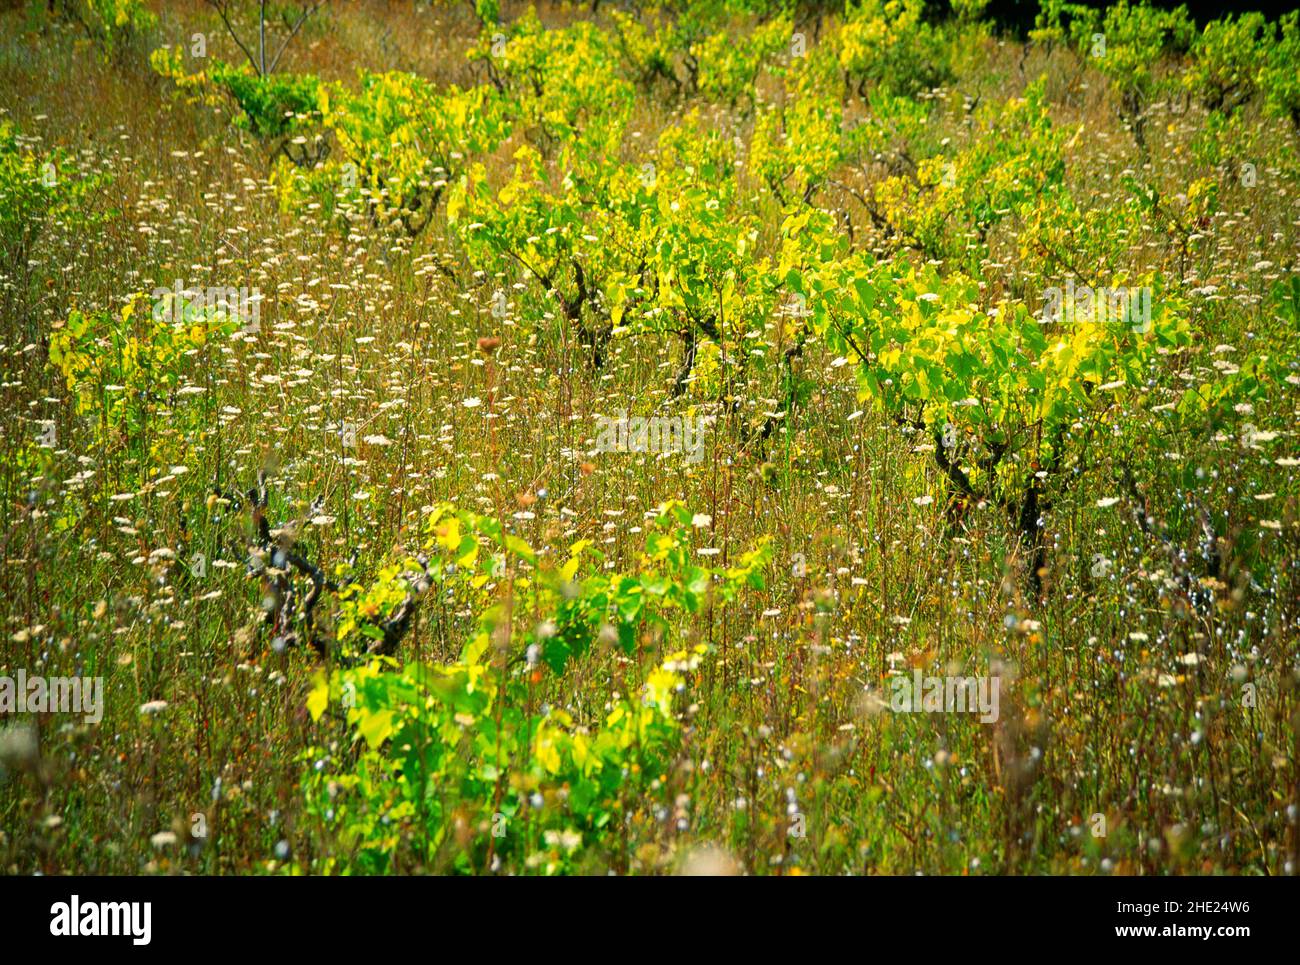 vineyard, gone to seed, Stock Photo